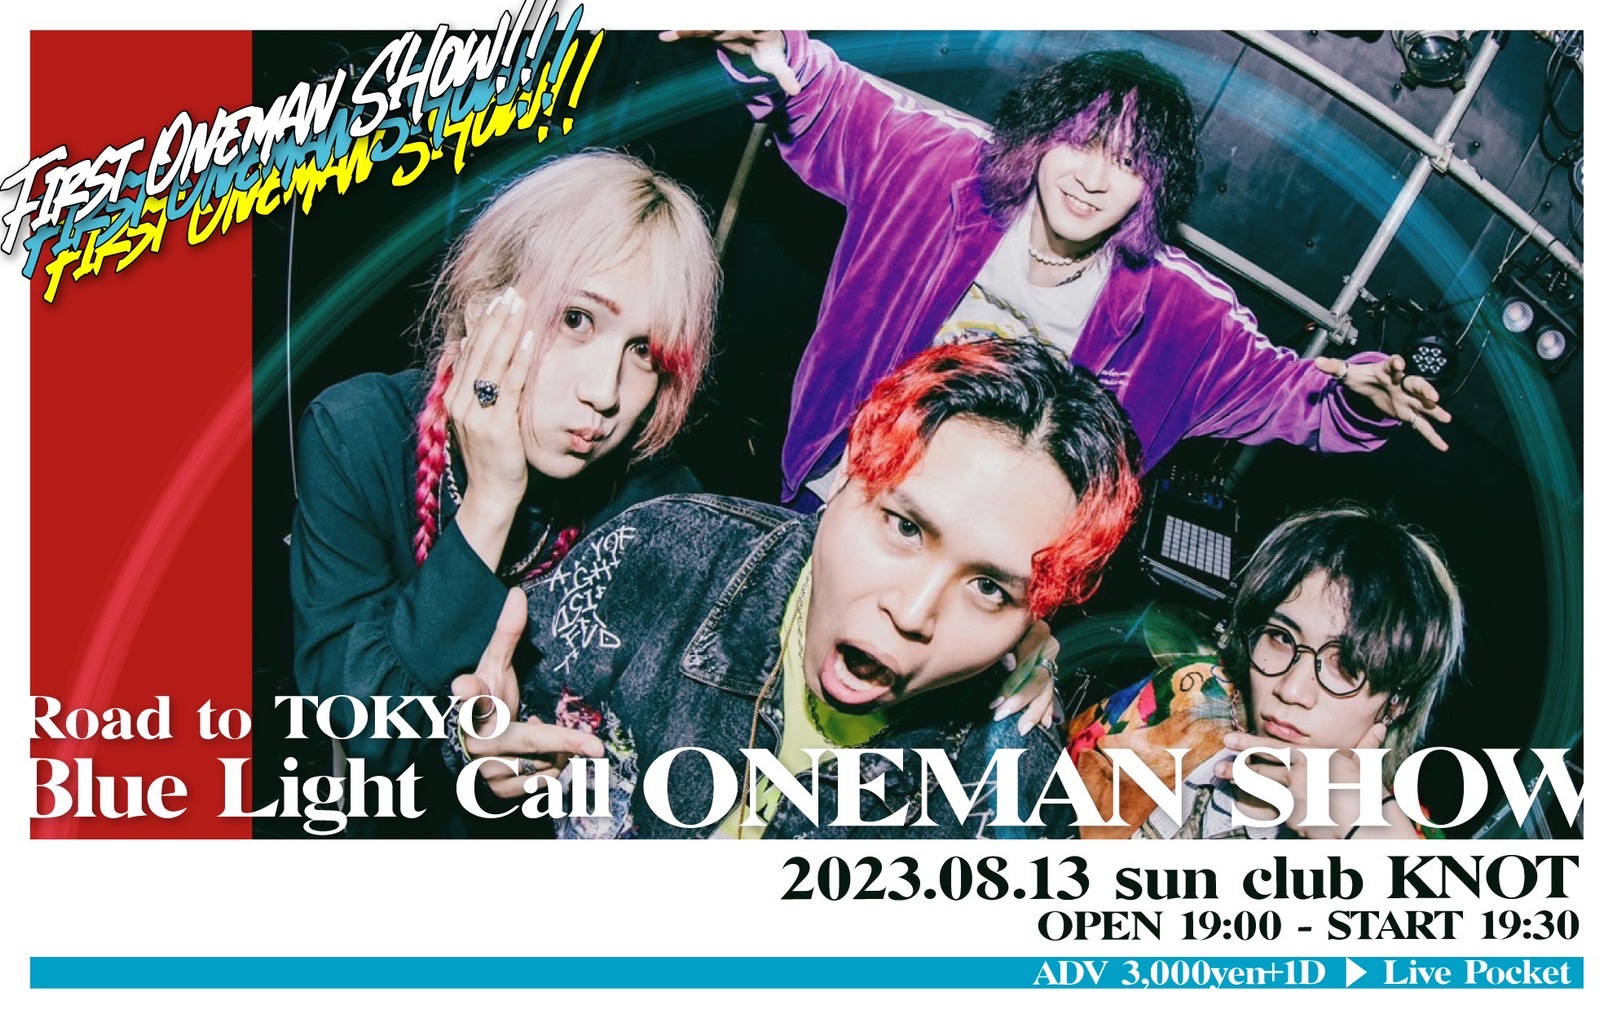 Blue Light Call ONEMAN SHOW "Road to TOKYO"